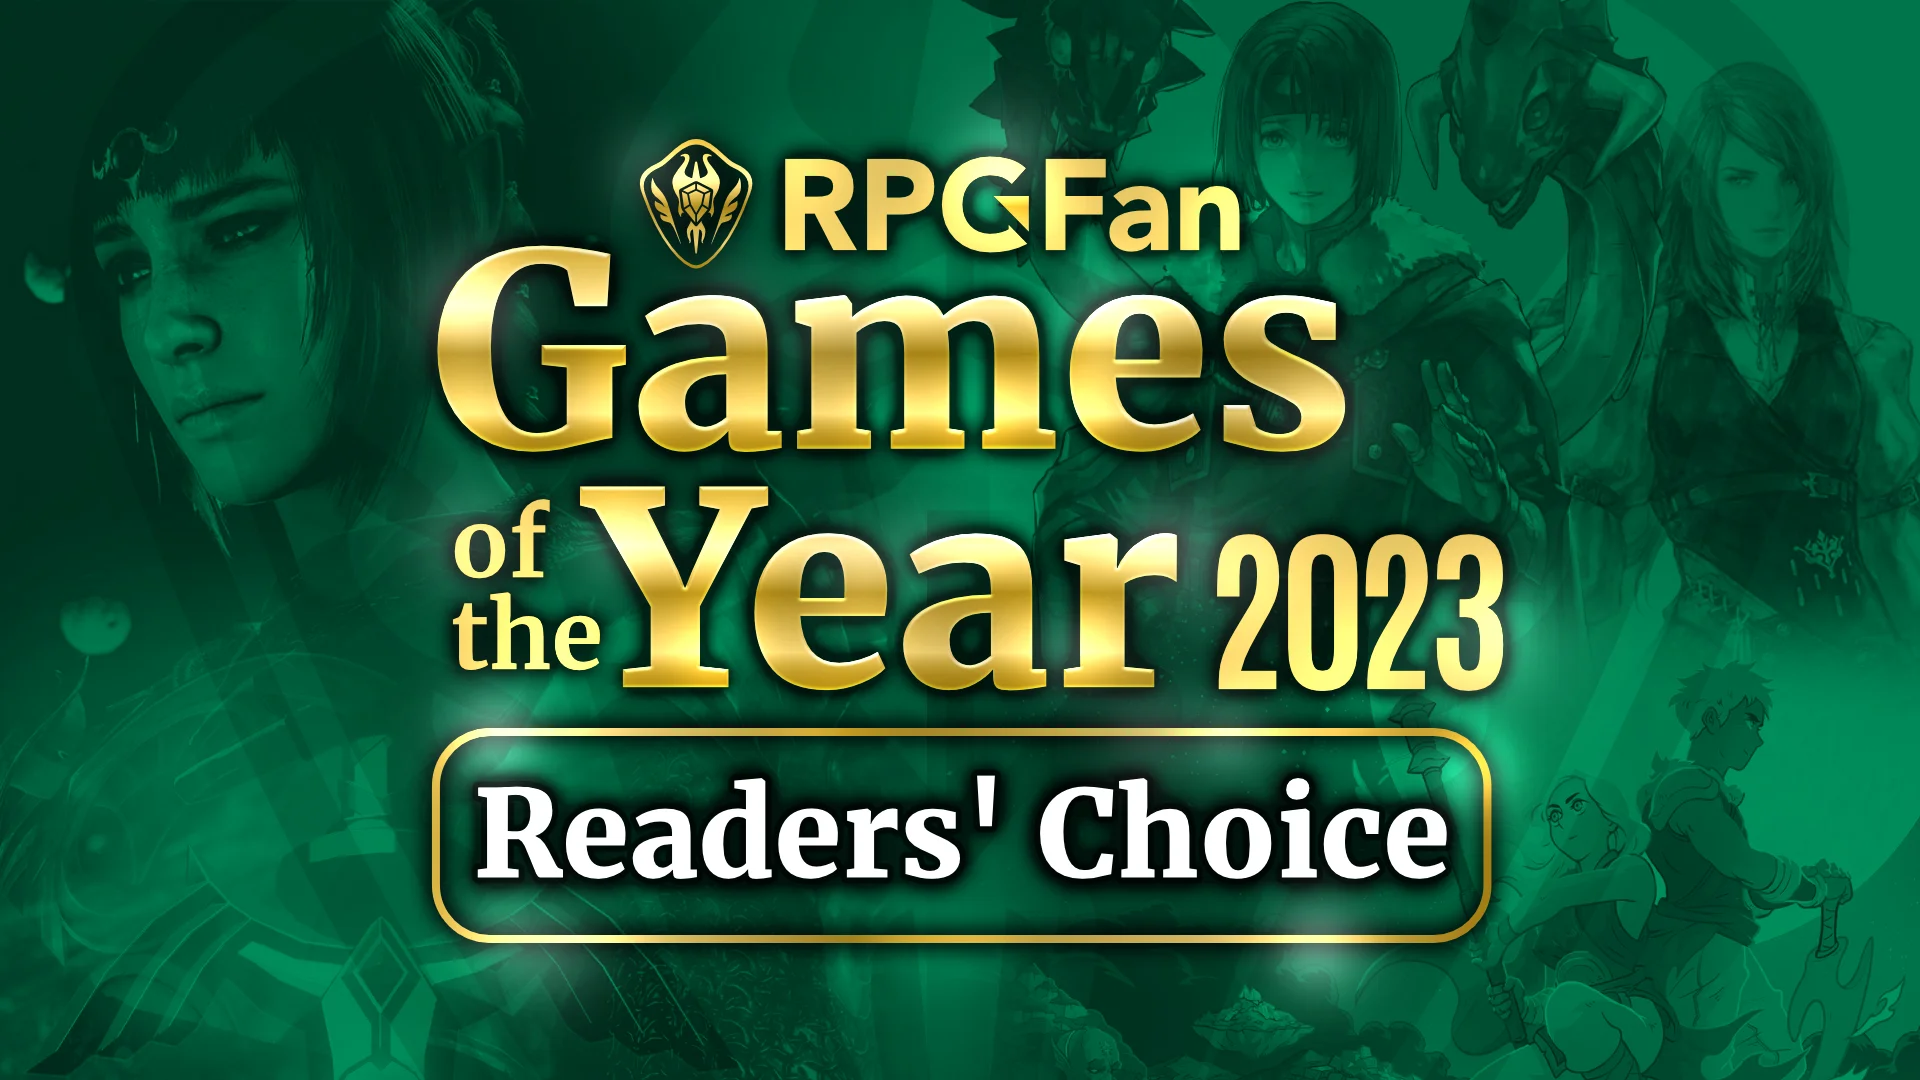 RPGFan Games of the Year 2023 Reader's Choice